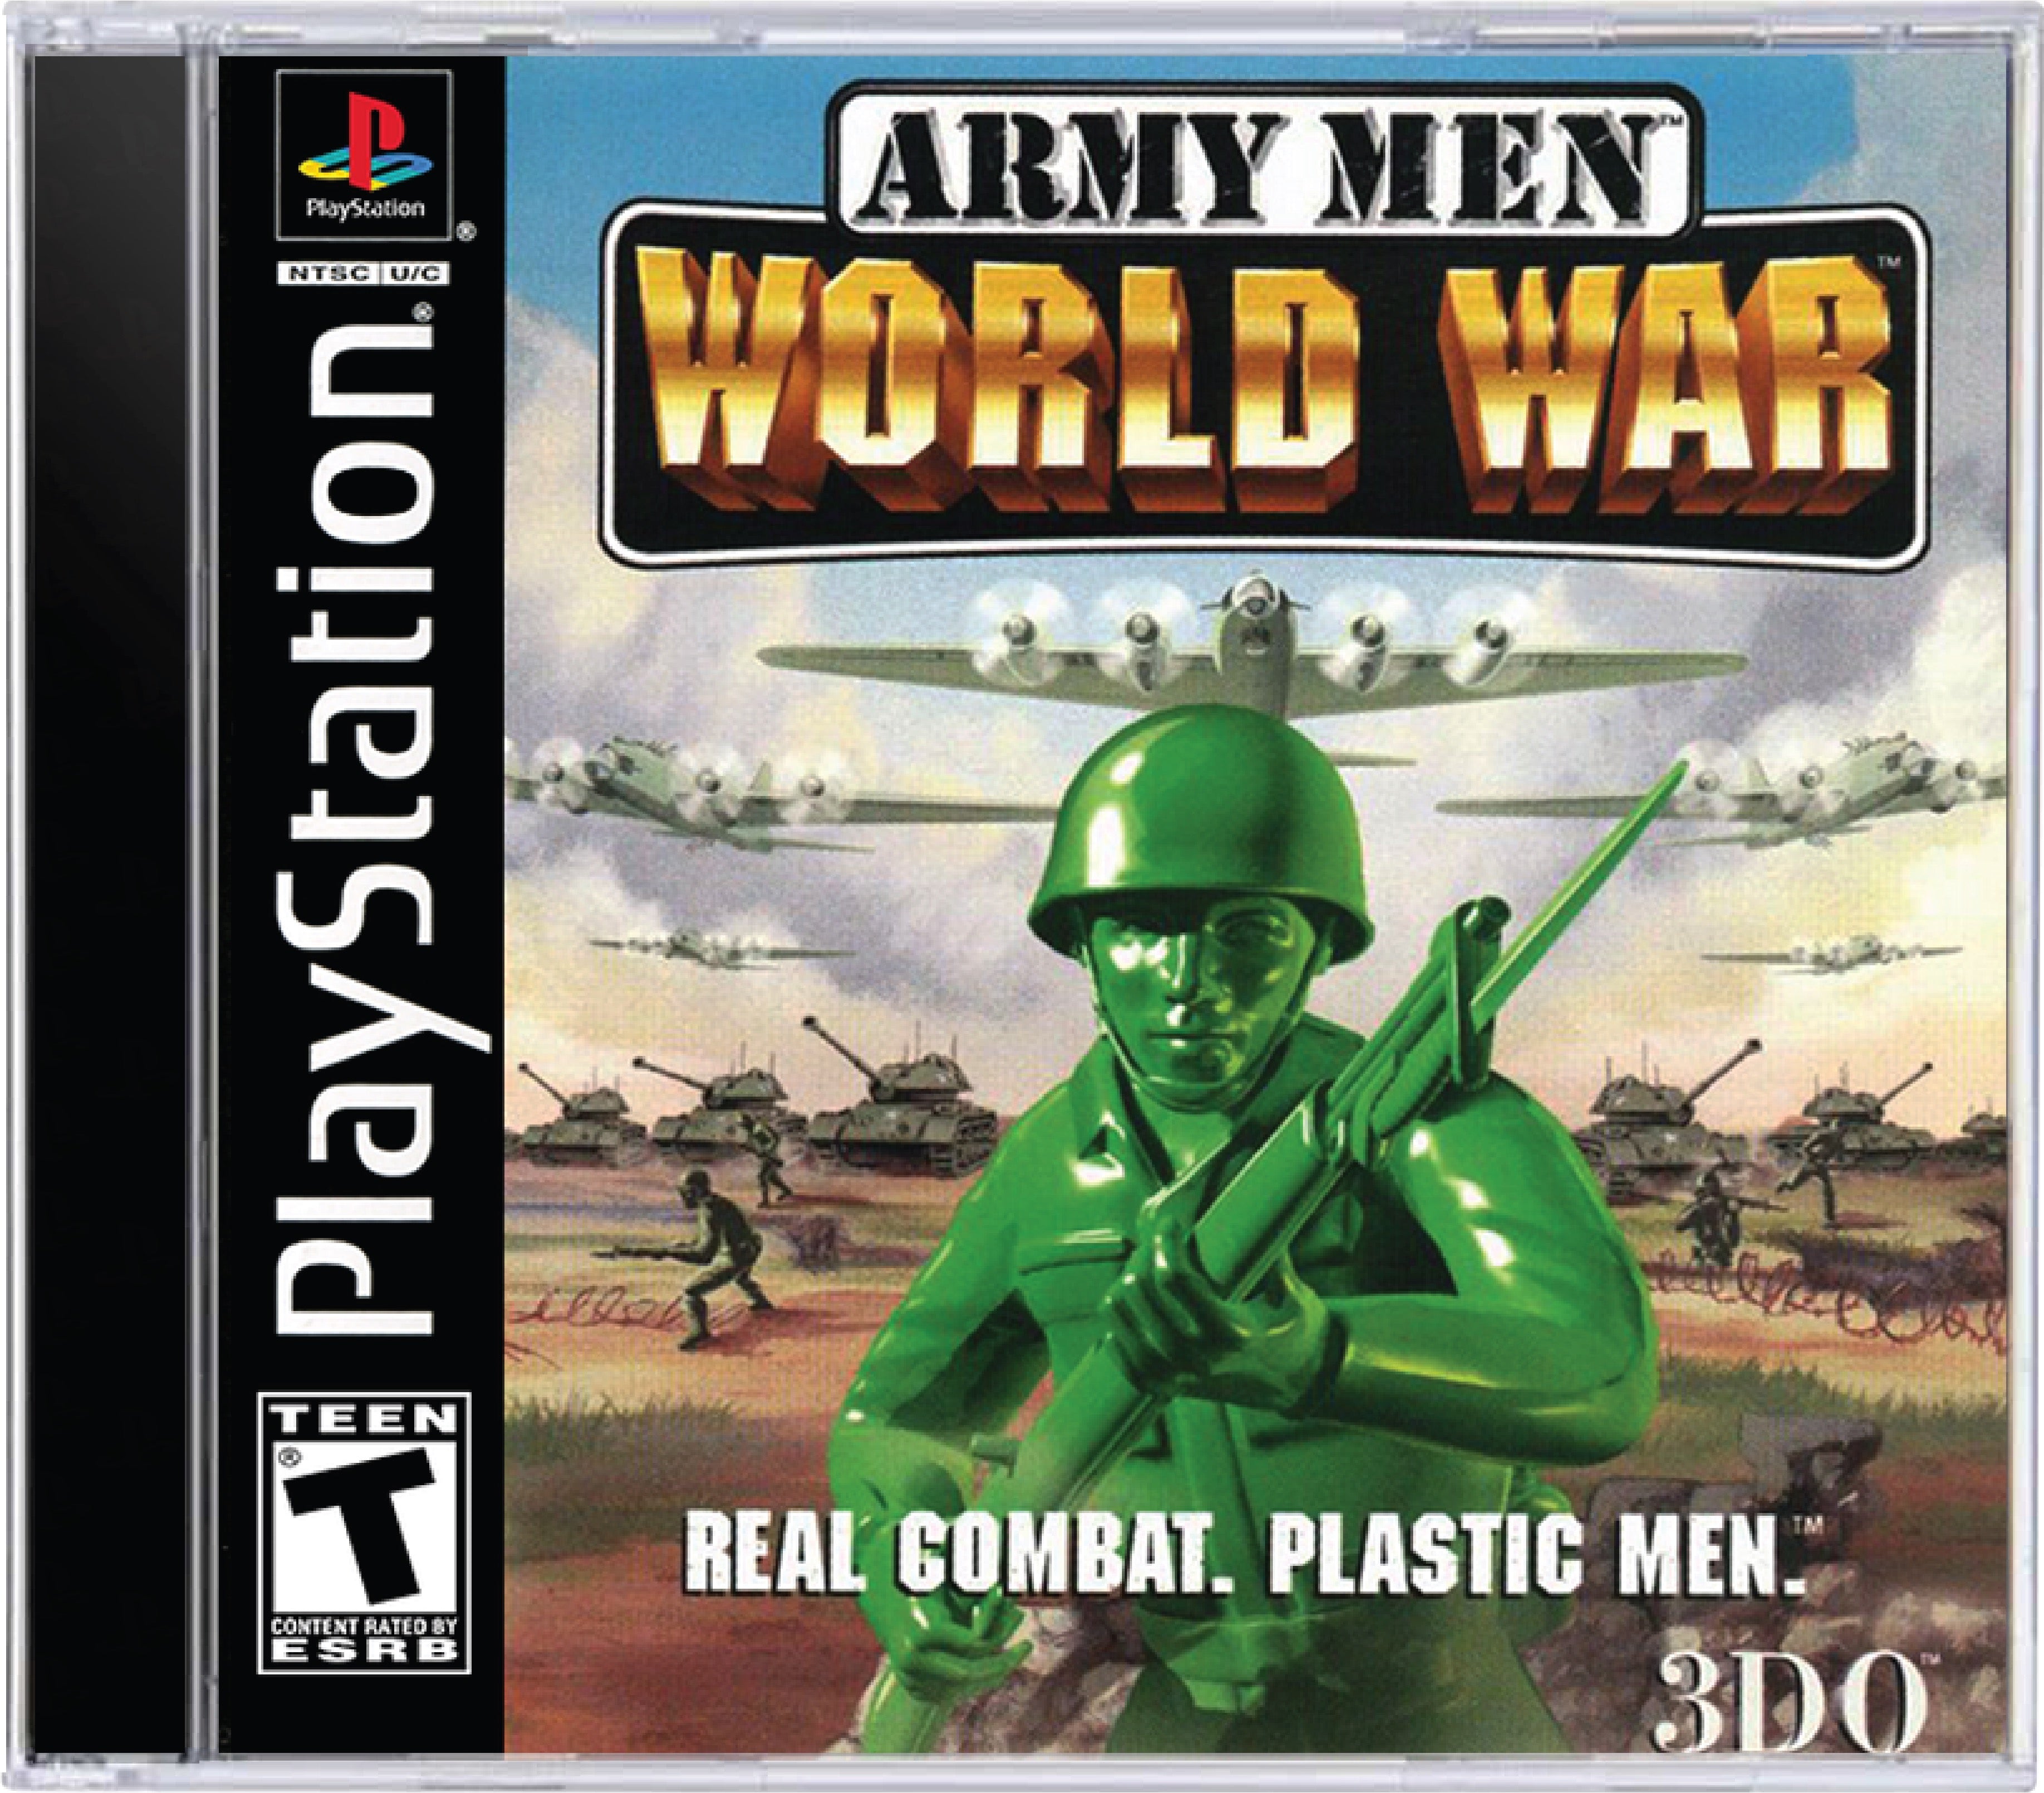 Army Men World War Cover Art and Product Photo